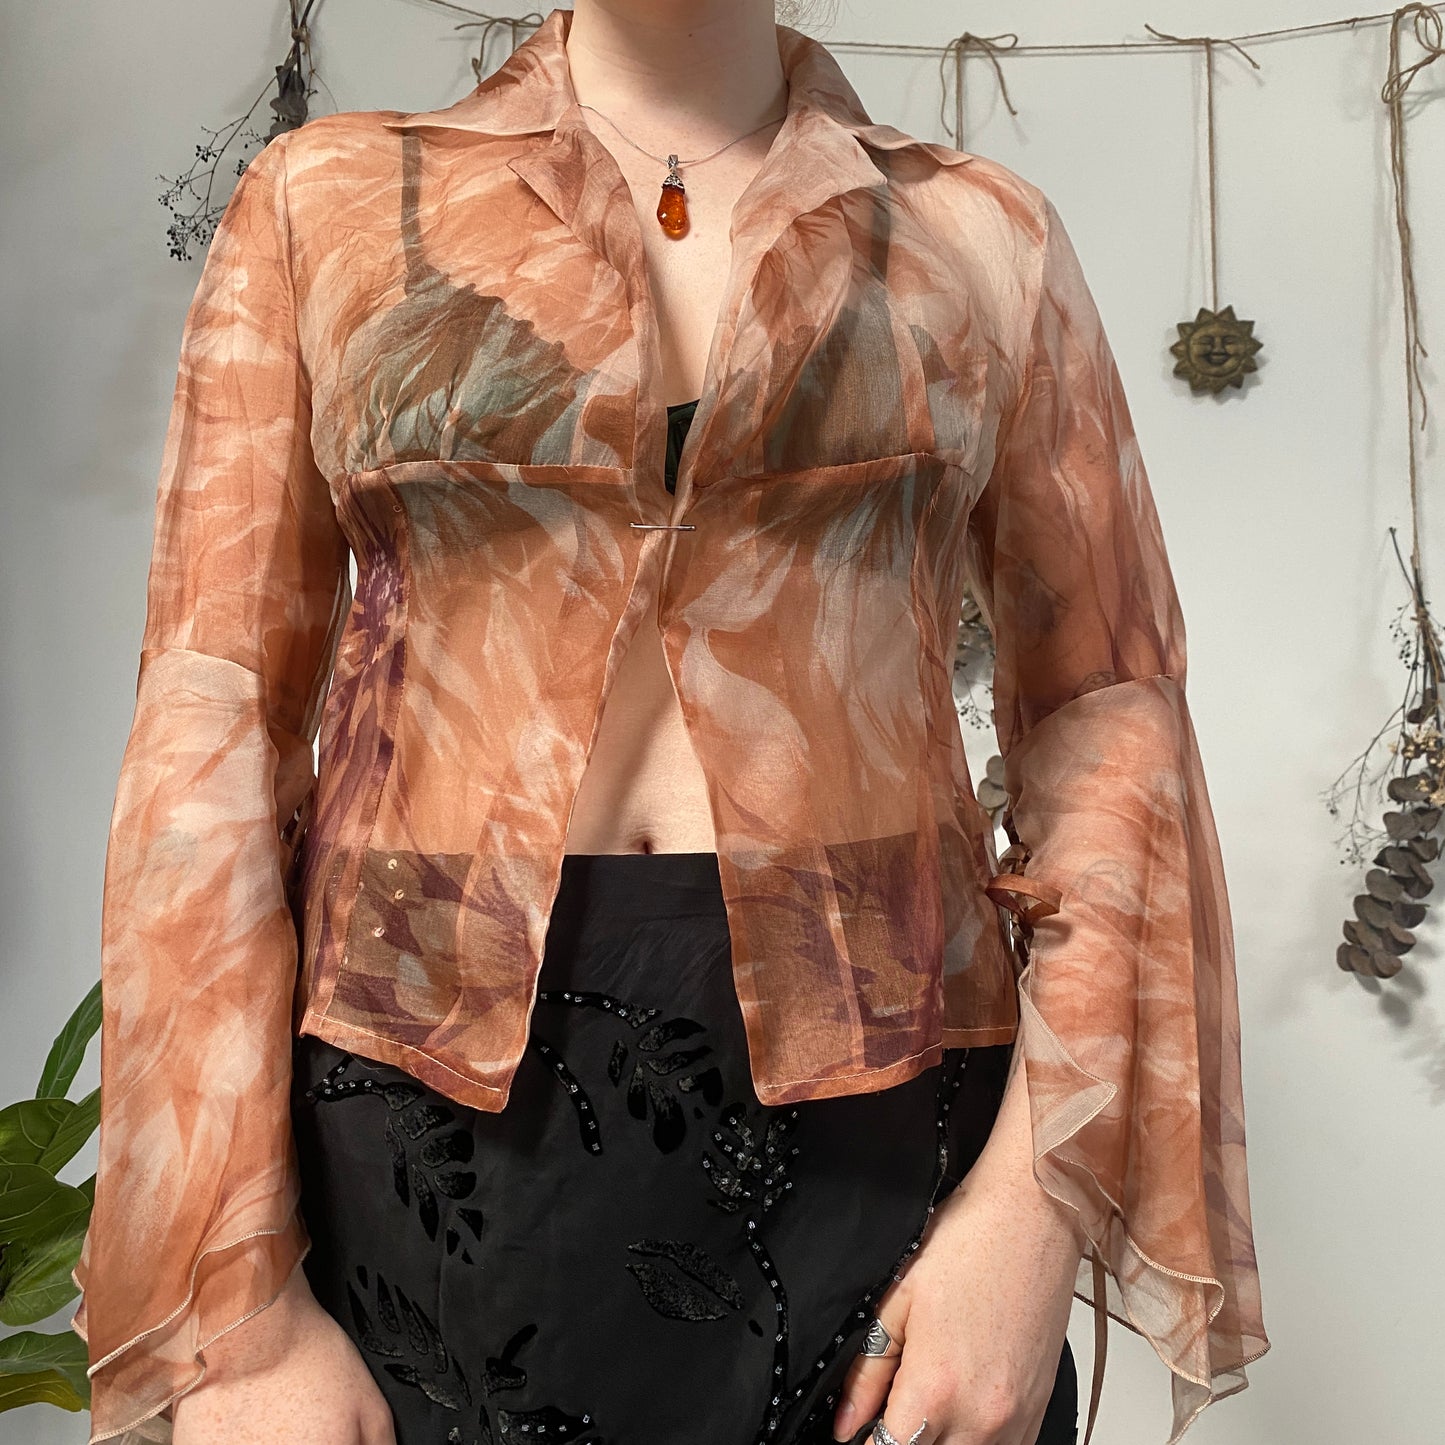 Sheer top - size M